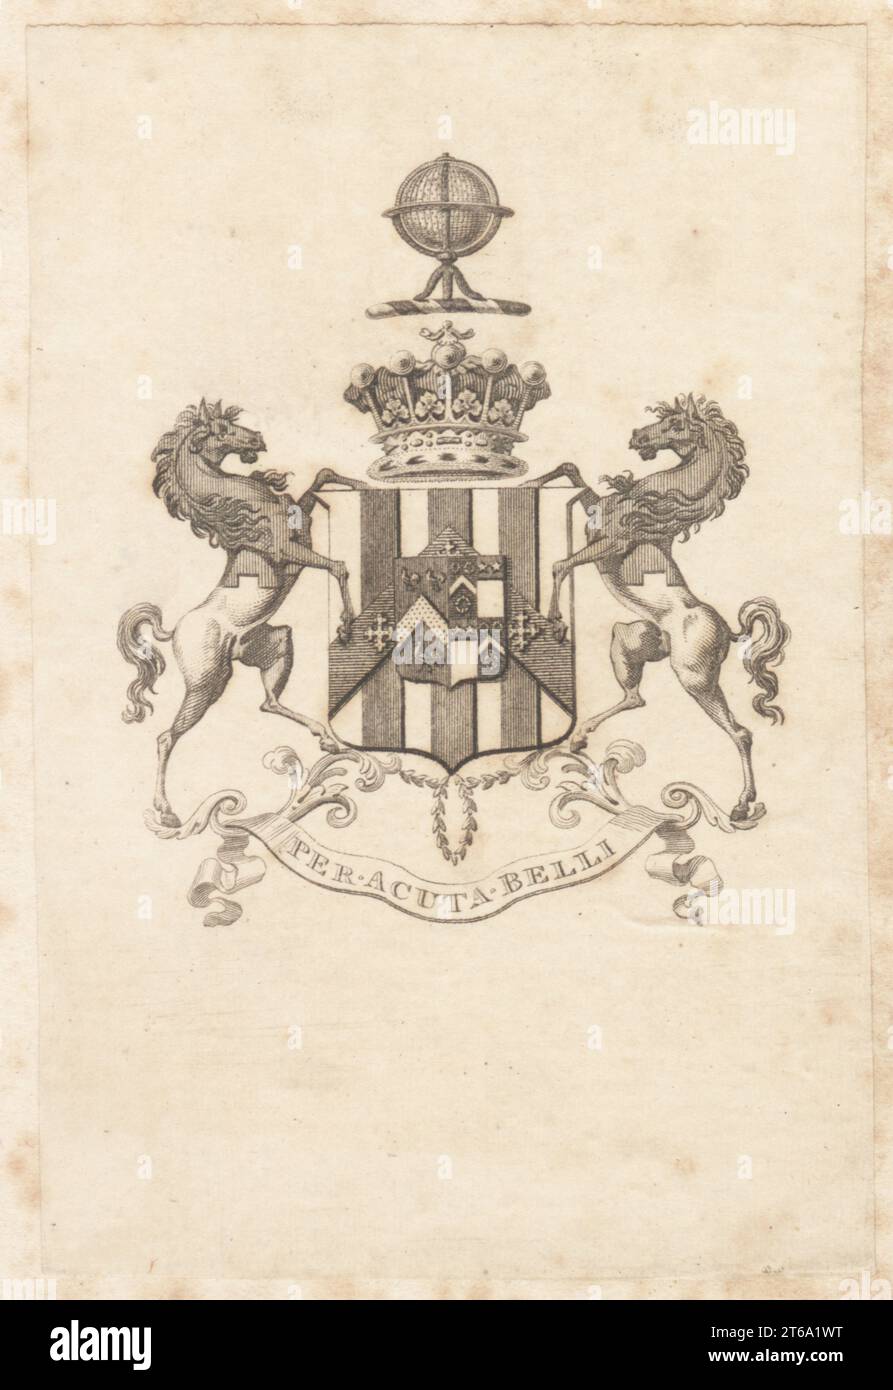 Copperplate engraved armorial bookplate of the Carpenter family, possibly John Carpenter, 4th Earl of Tyrconnell (1790-1854). Motto 'Per Acuta Belli,' Paly of six, argent and gules, on a chevron azure, three cross crosslets or. Crest, on a wreath a globe in a frame all or. Supporters, two horses, party-perfess, embattled argent and gules. Stock Photo